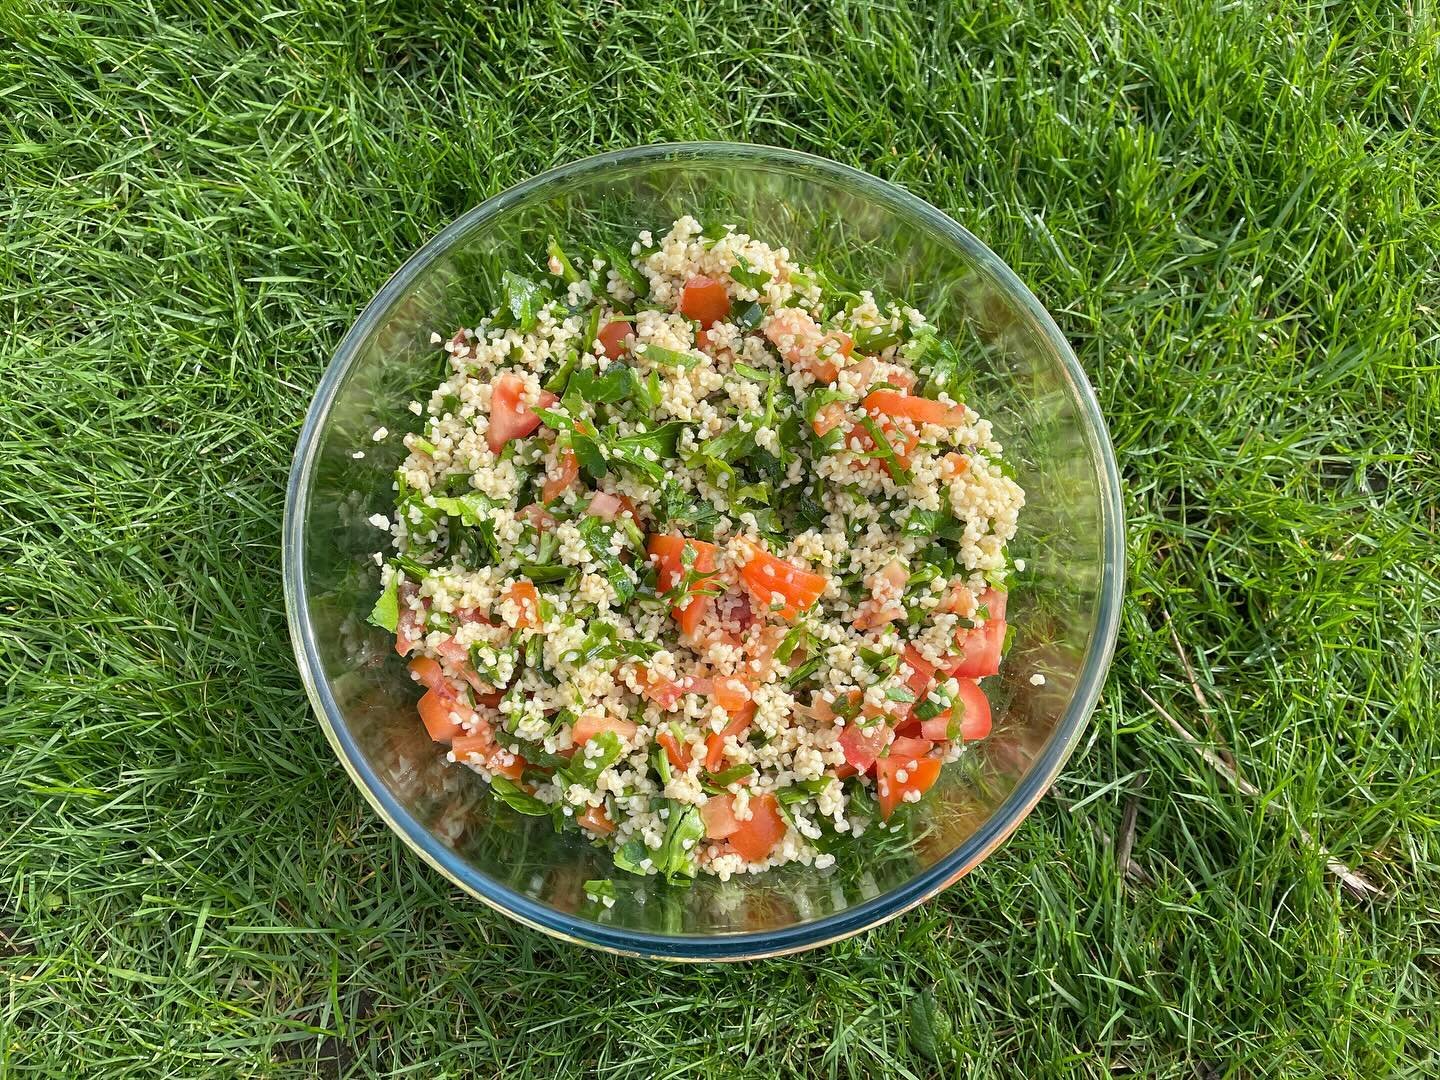 Combat Cooking - March: Lebanese Tabbouleh. The border between Israel and Lebanon has essentially been closed since 1949. That is 75 years ago next month. While there is still a checkpoint, it is only for UN soldiers.

Tabbouleh is a delicious, refre